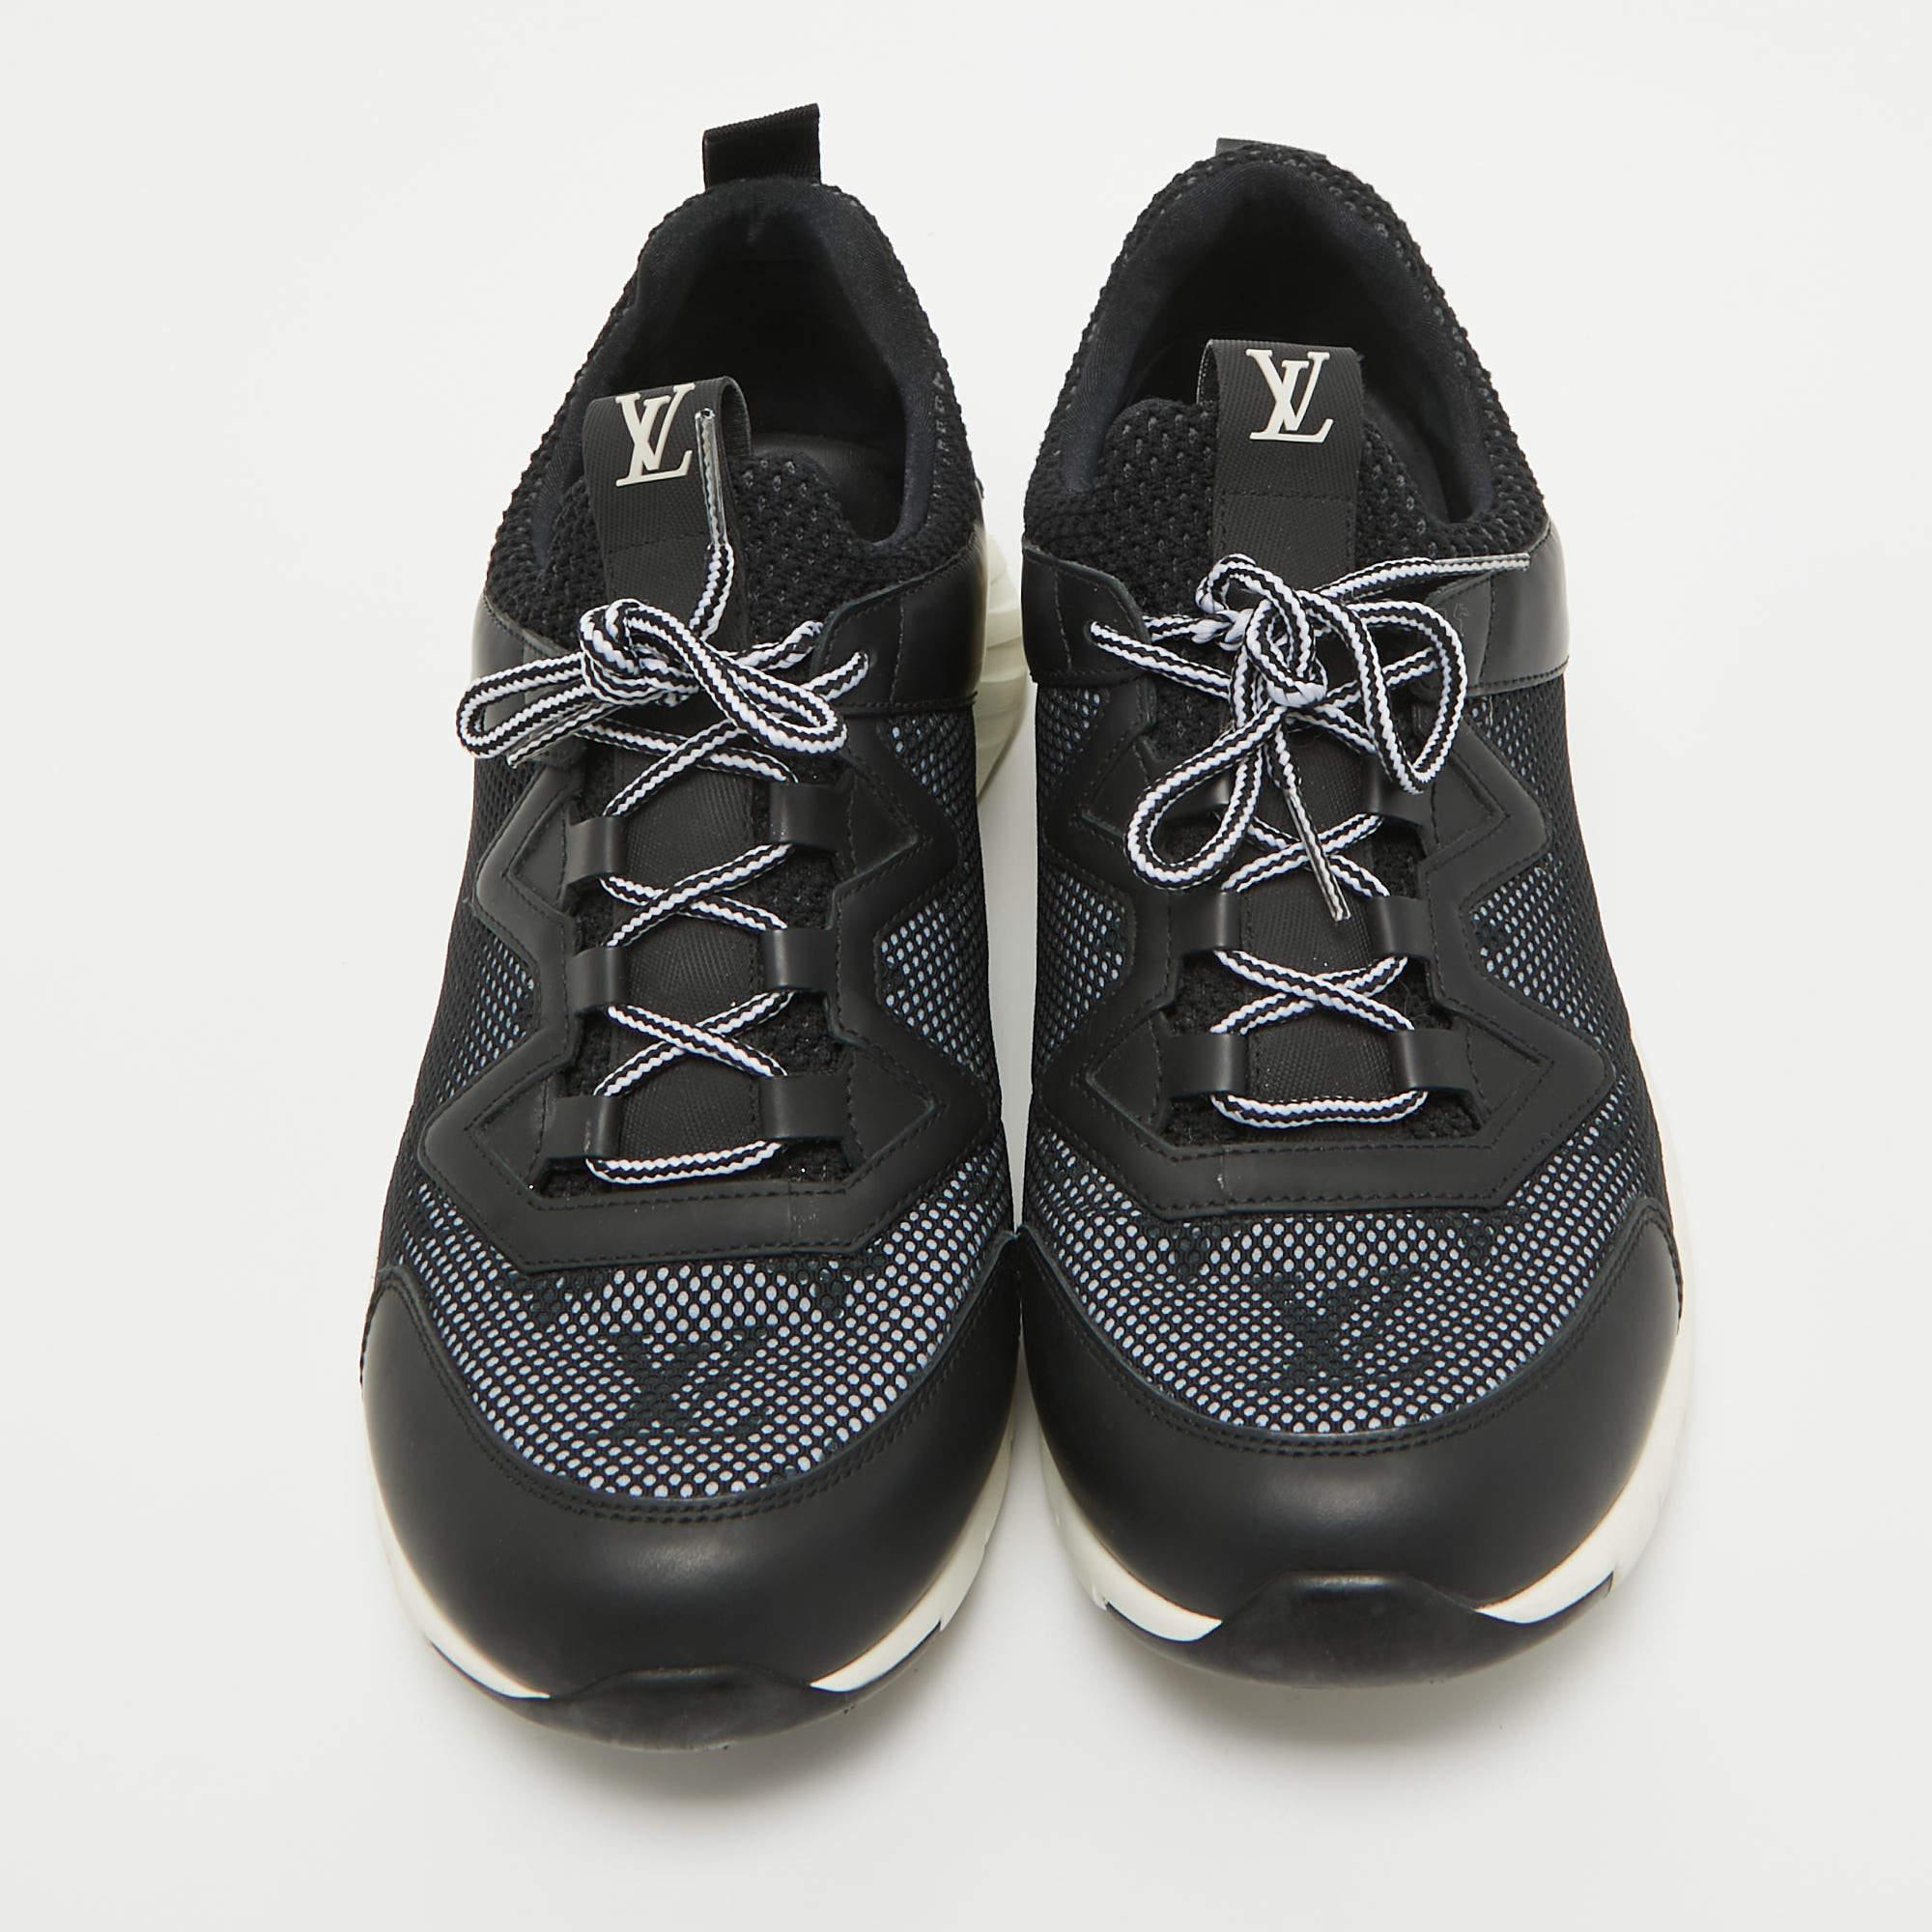 Coming in a classic silhouette, these Louis Vuitton black sneakers are a seamless combination of luxury, comfort, and style. These sneakers are designed with signature details and comfortable insoles.

